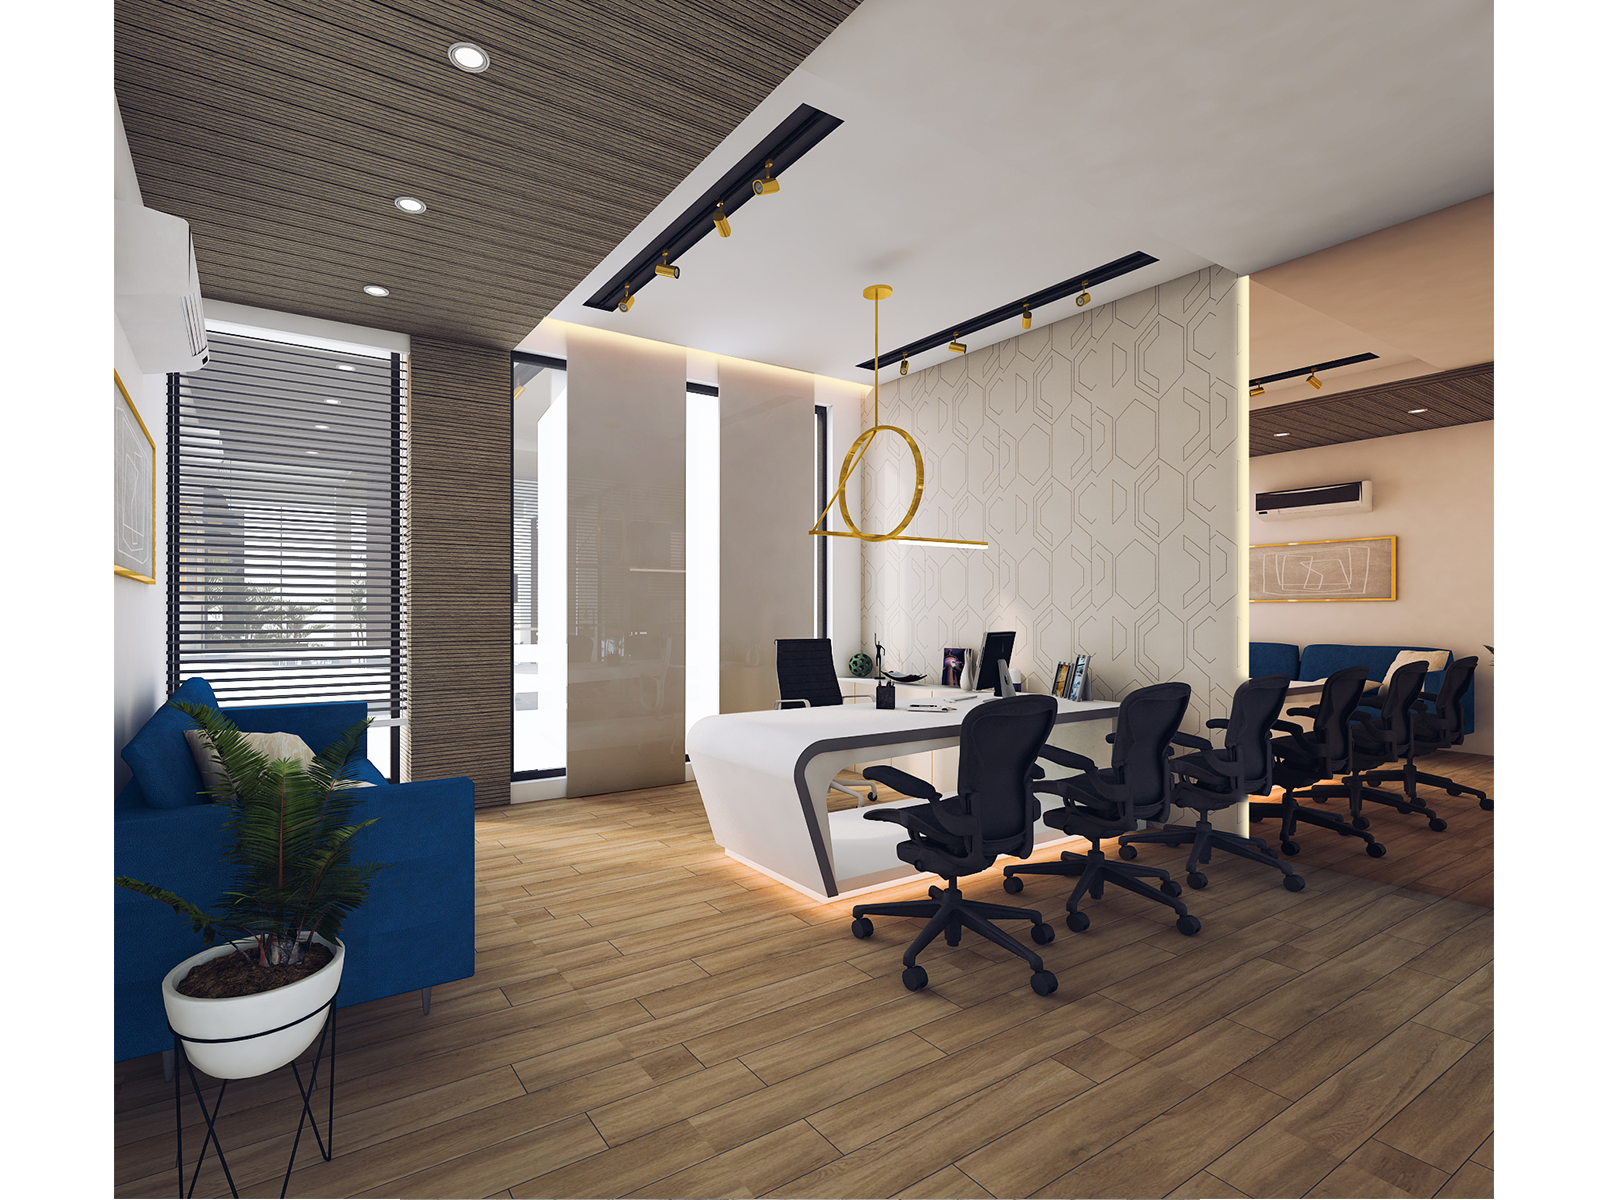 We are Provide the Best Interior Office Design